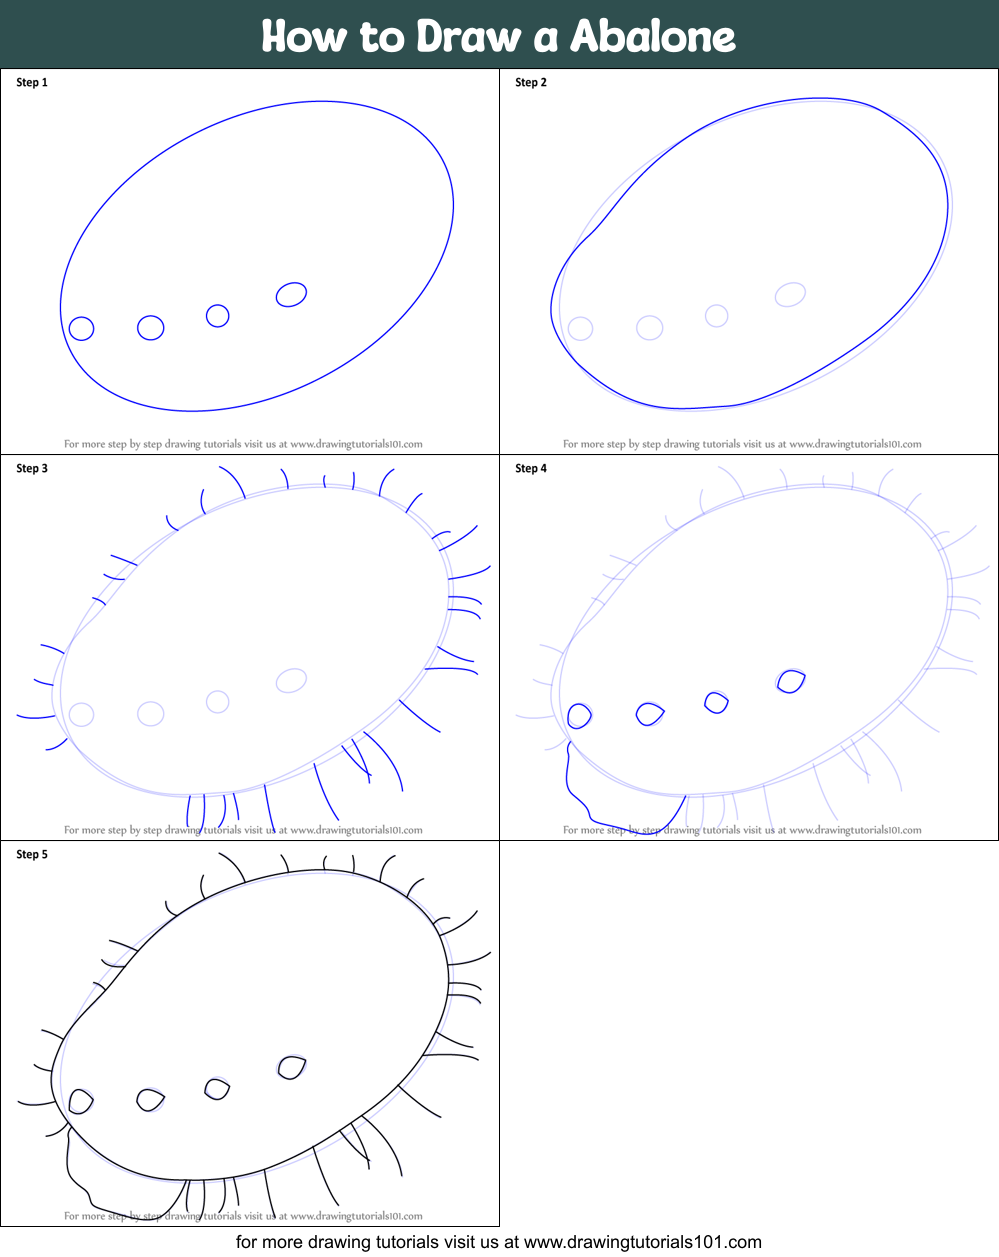 How to Draw a Abalone printable step by step drawing sheet